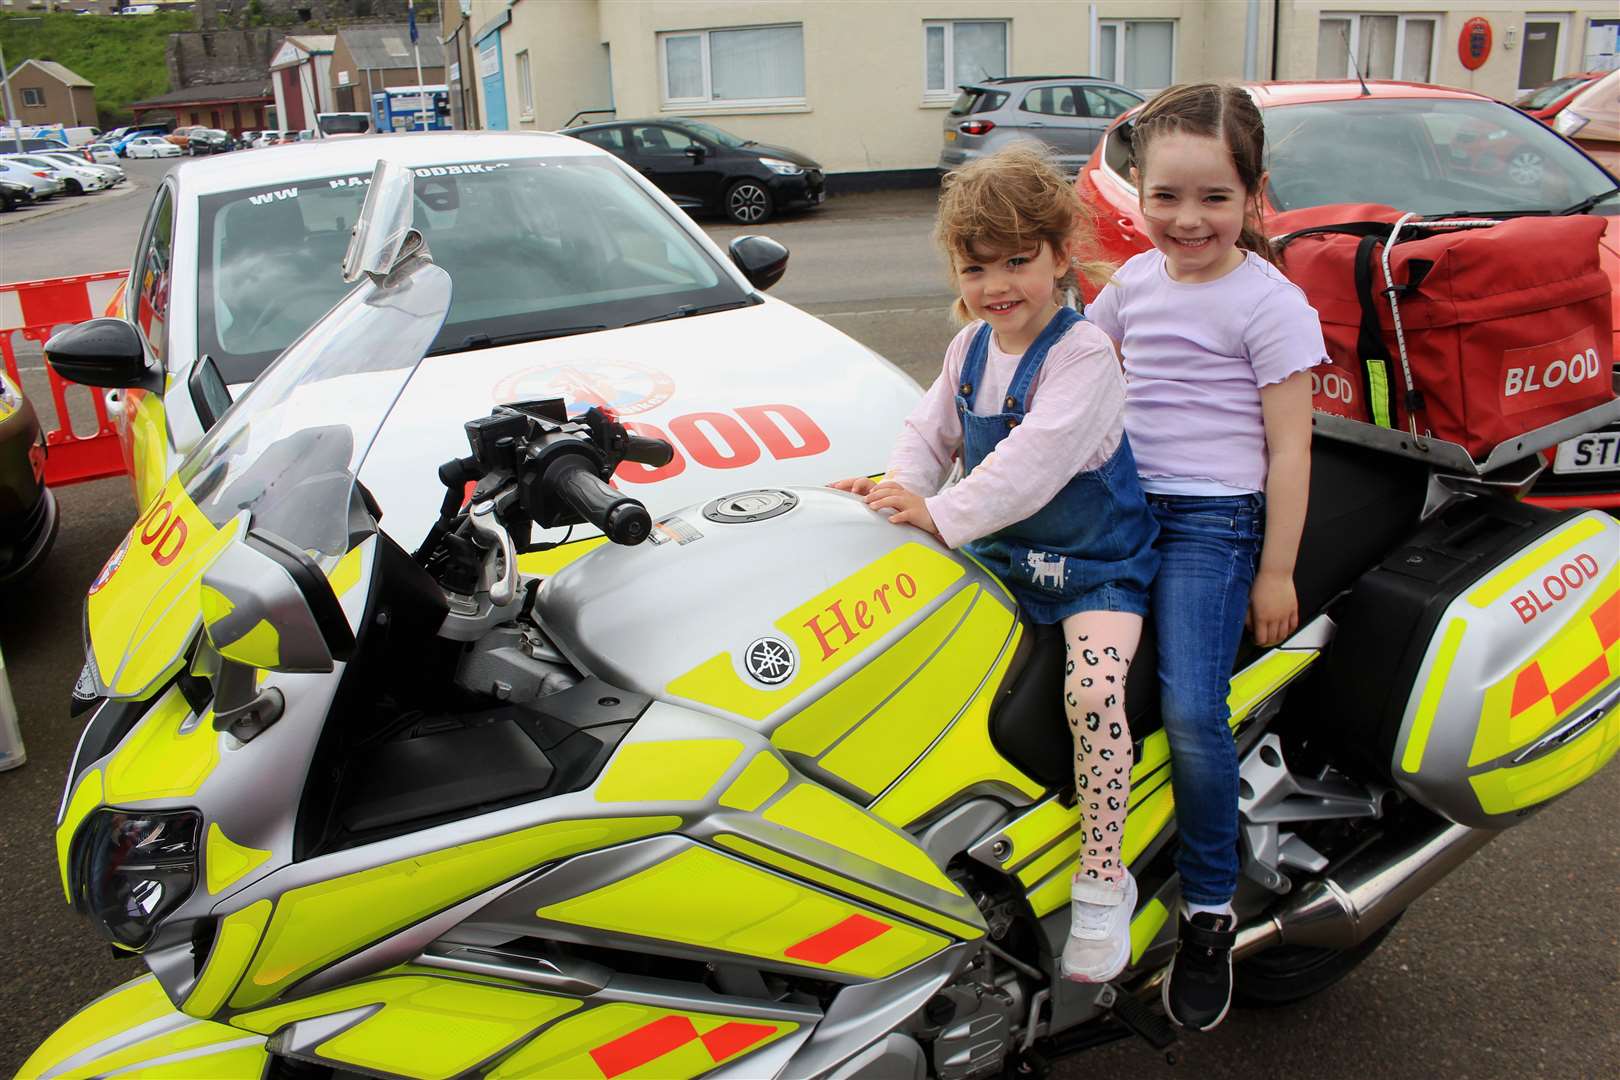 Cammie Mackay (3) and her cousin Hannah Mackay (6) on a motorcycle brought along by Highland and Islands Blood Bikes. Picture: Alan Hendry